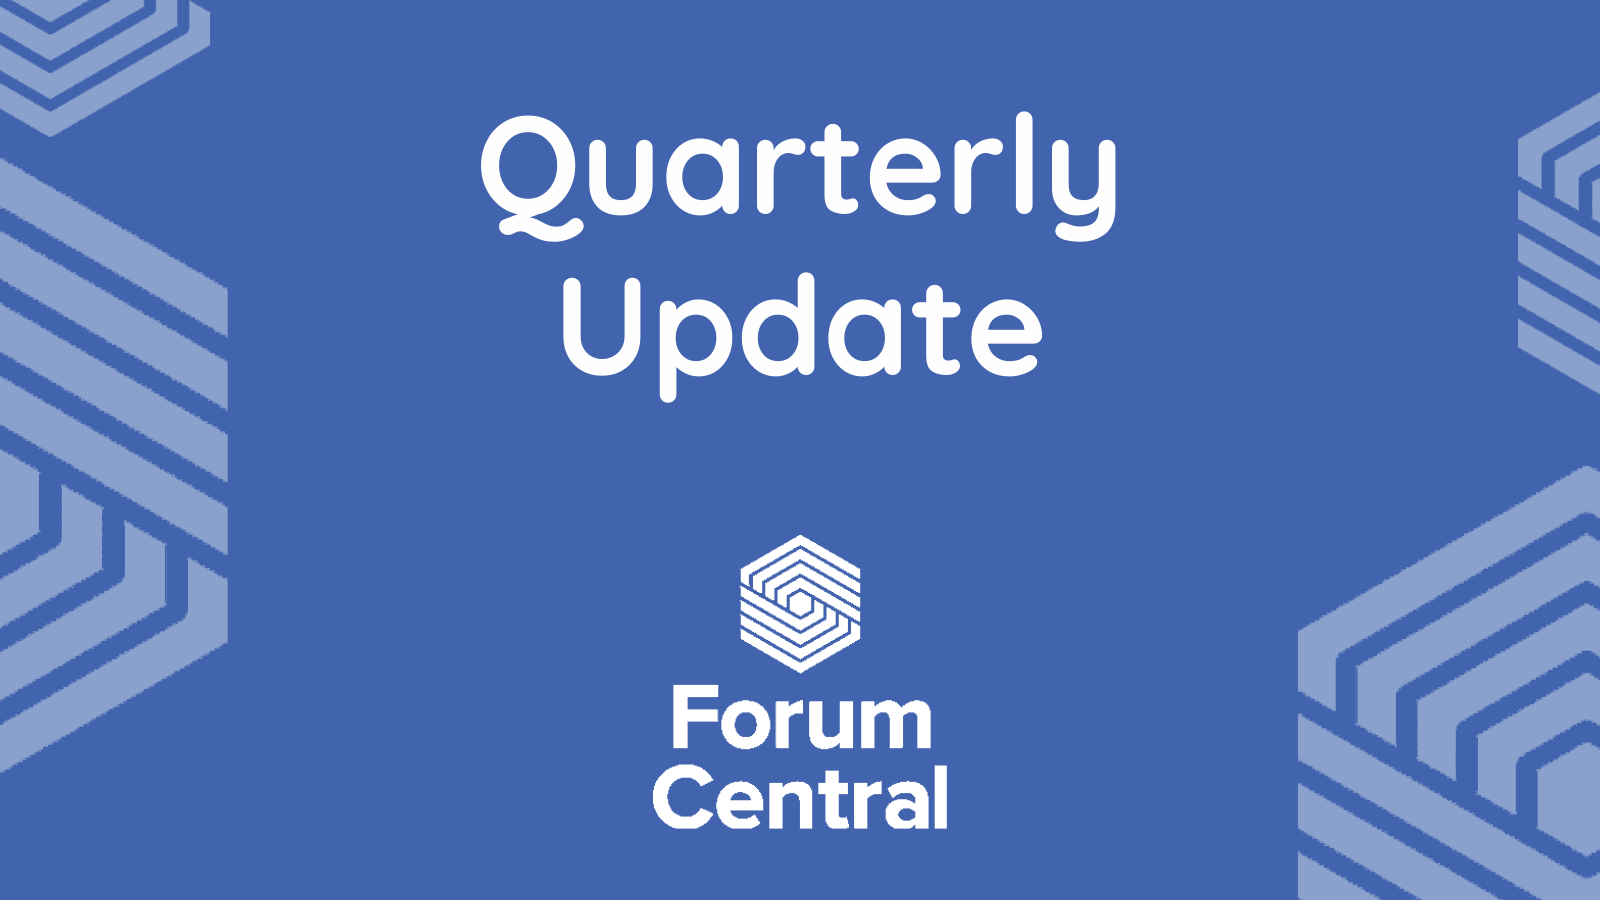 White text reading "Quarterly Update" on blue background with Forum Central logo